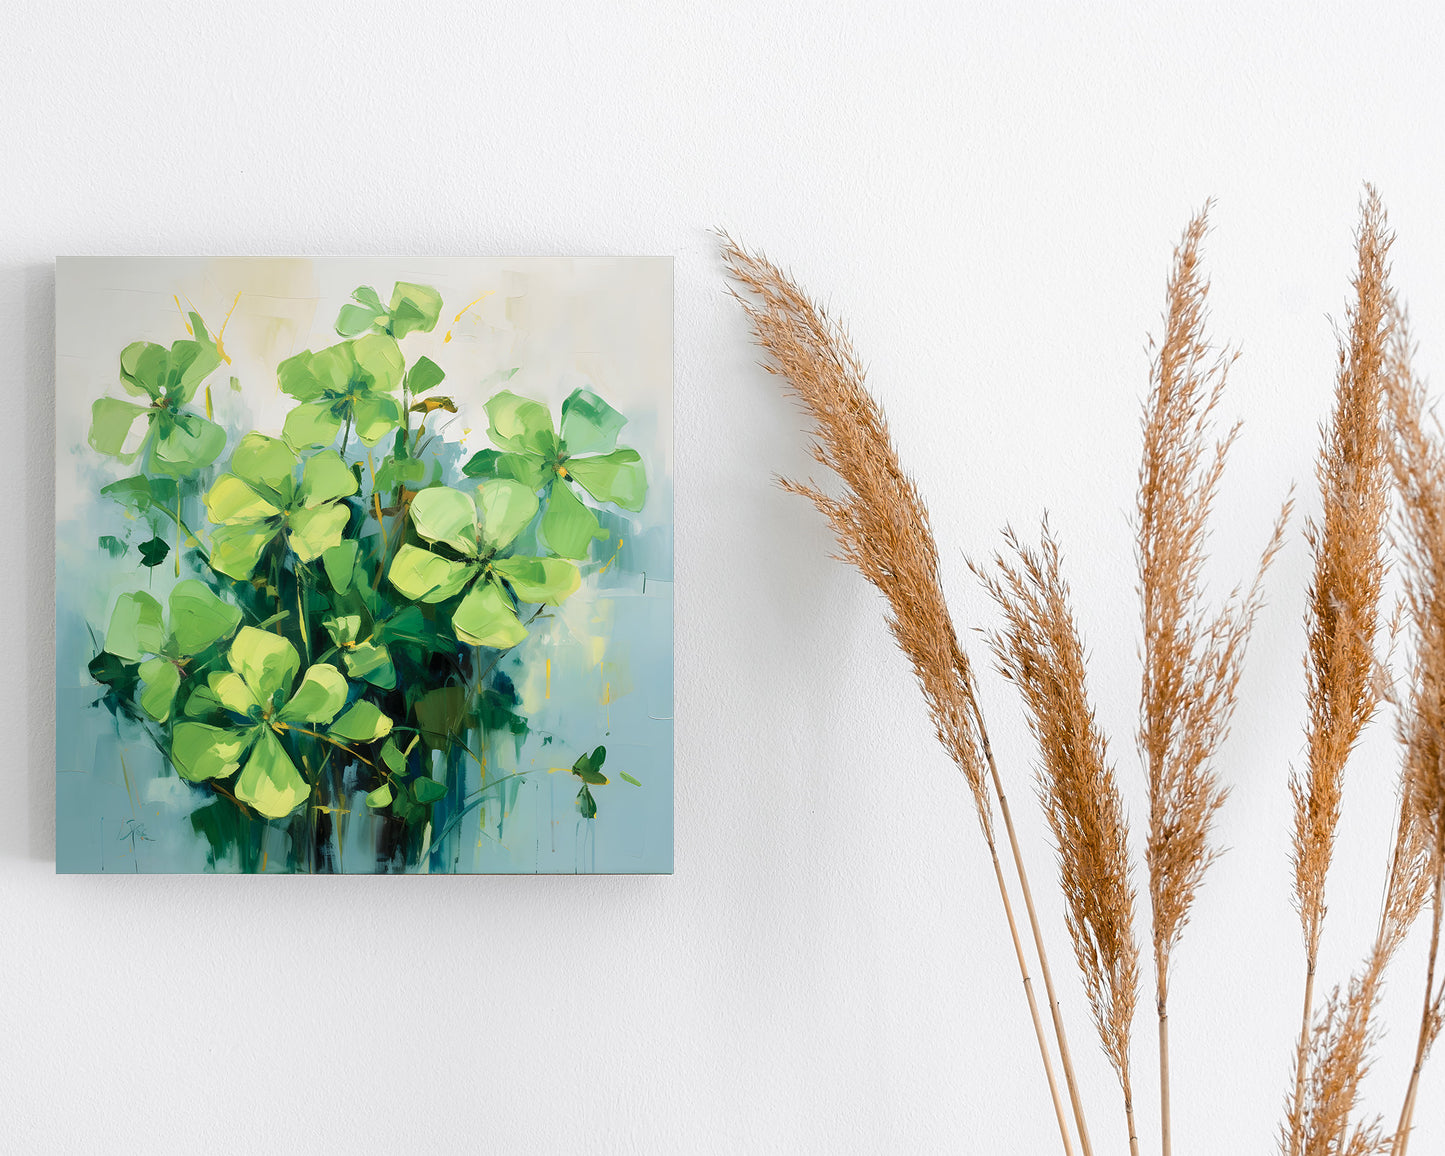 12 inches Oil Painting Style of a Colorful Shamrock Modern Farmhouse Canvas UV Print Wall Art, St. Patrick's Day Wall Decor Living Room Decor